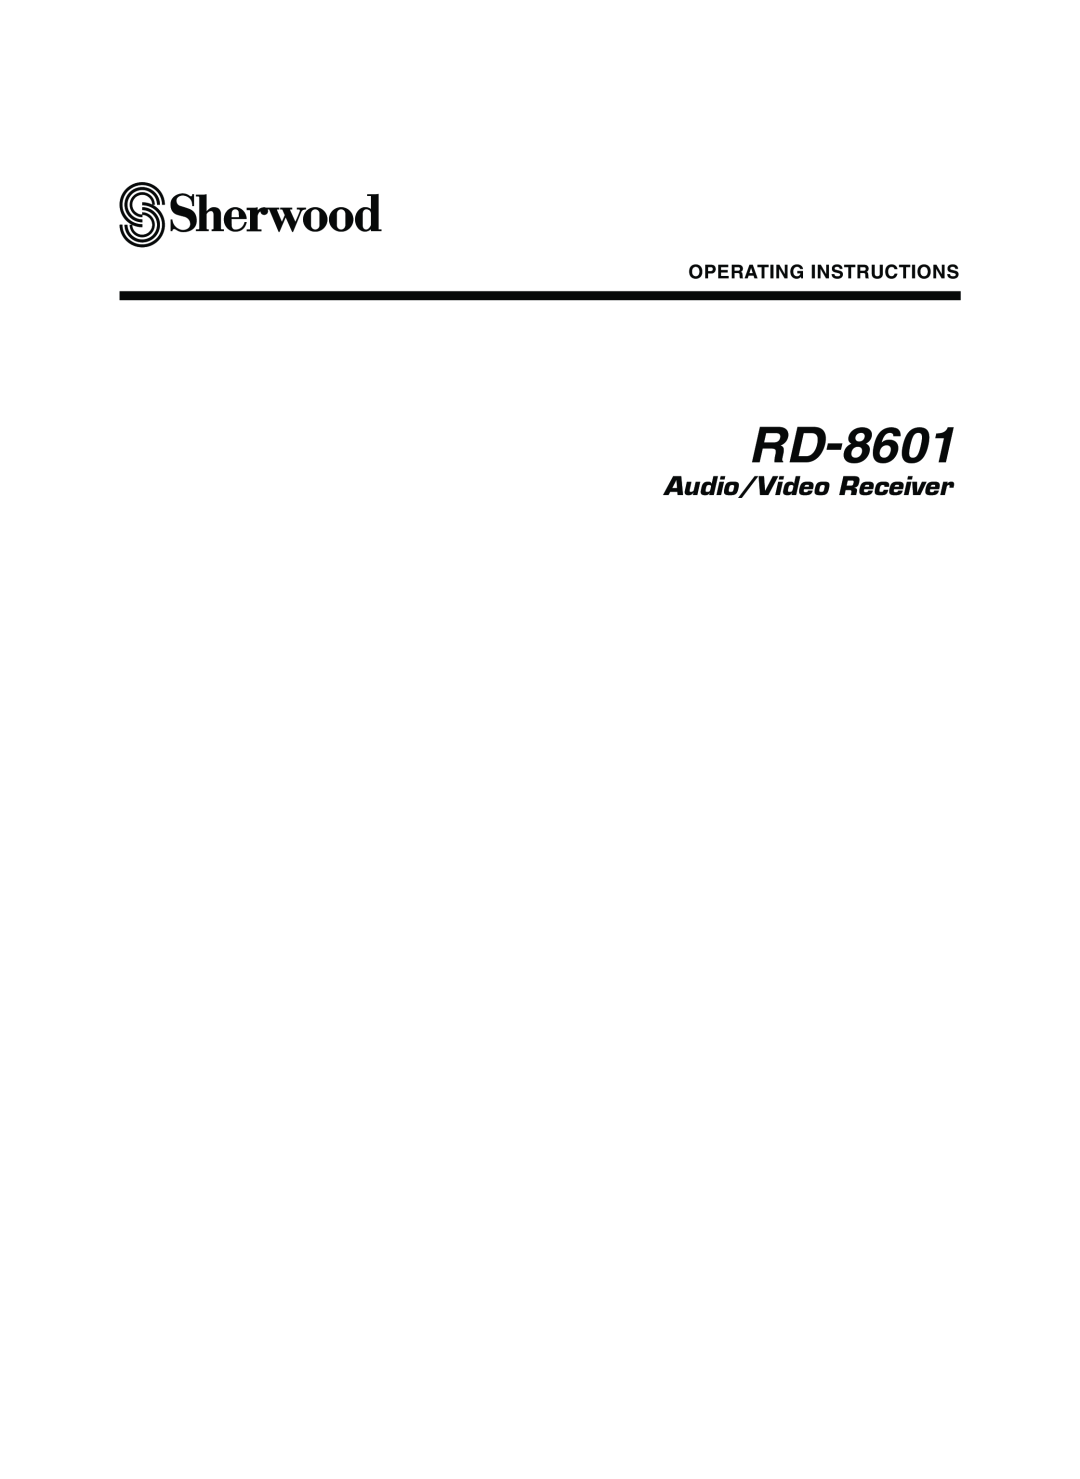 Sherwood RD-8601 operating instructions Operating Instructions, Audio/Video Receiver 